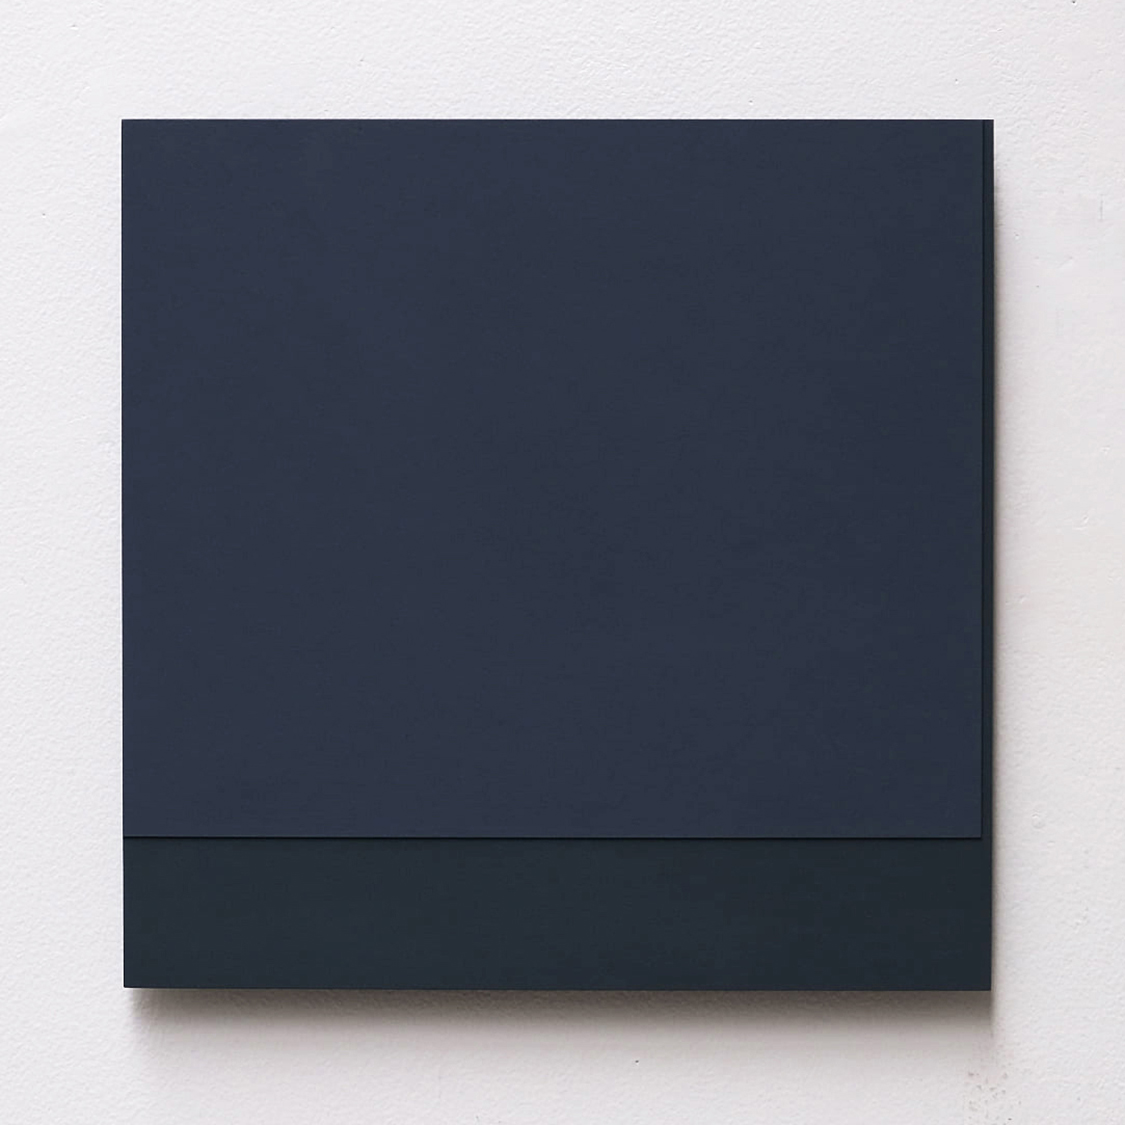 TS2204<br>Gesso on panel, 30 x 30 cm, 2022<br>¥120,000 - 240,000